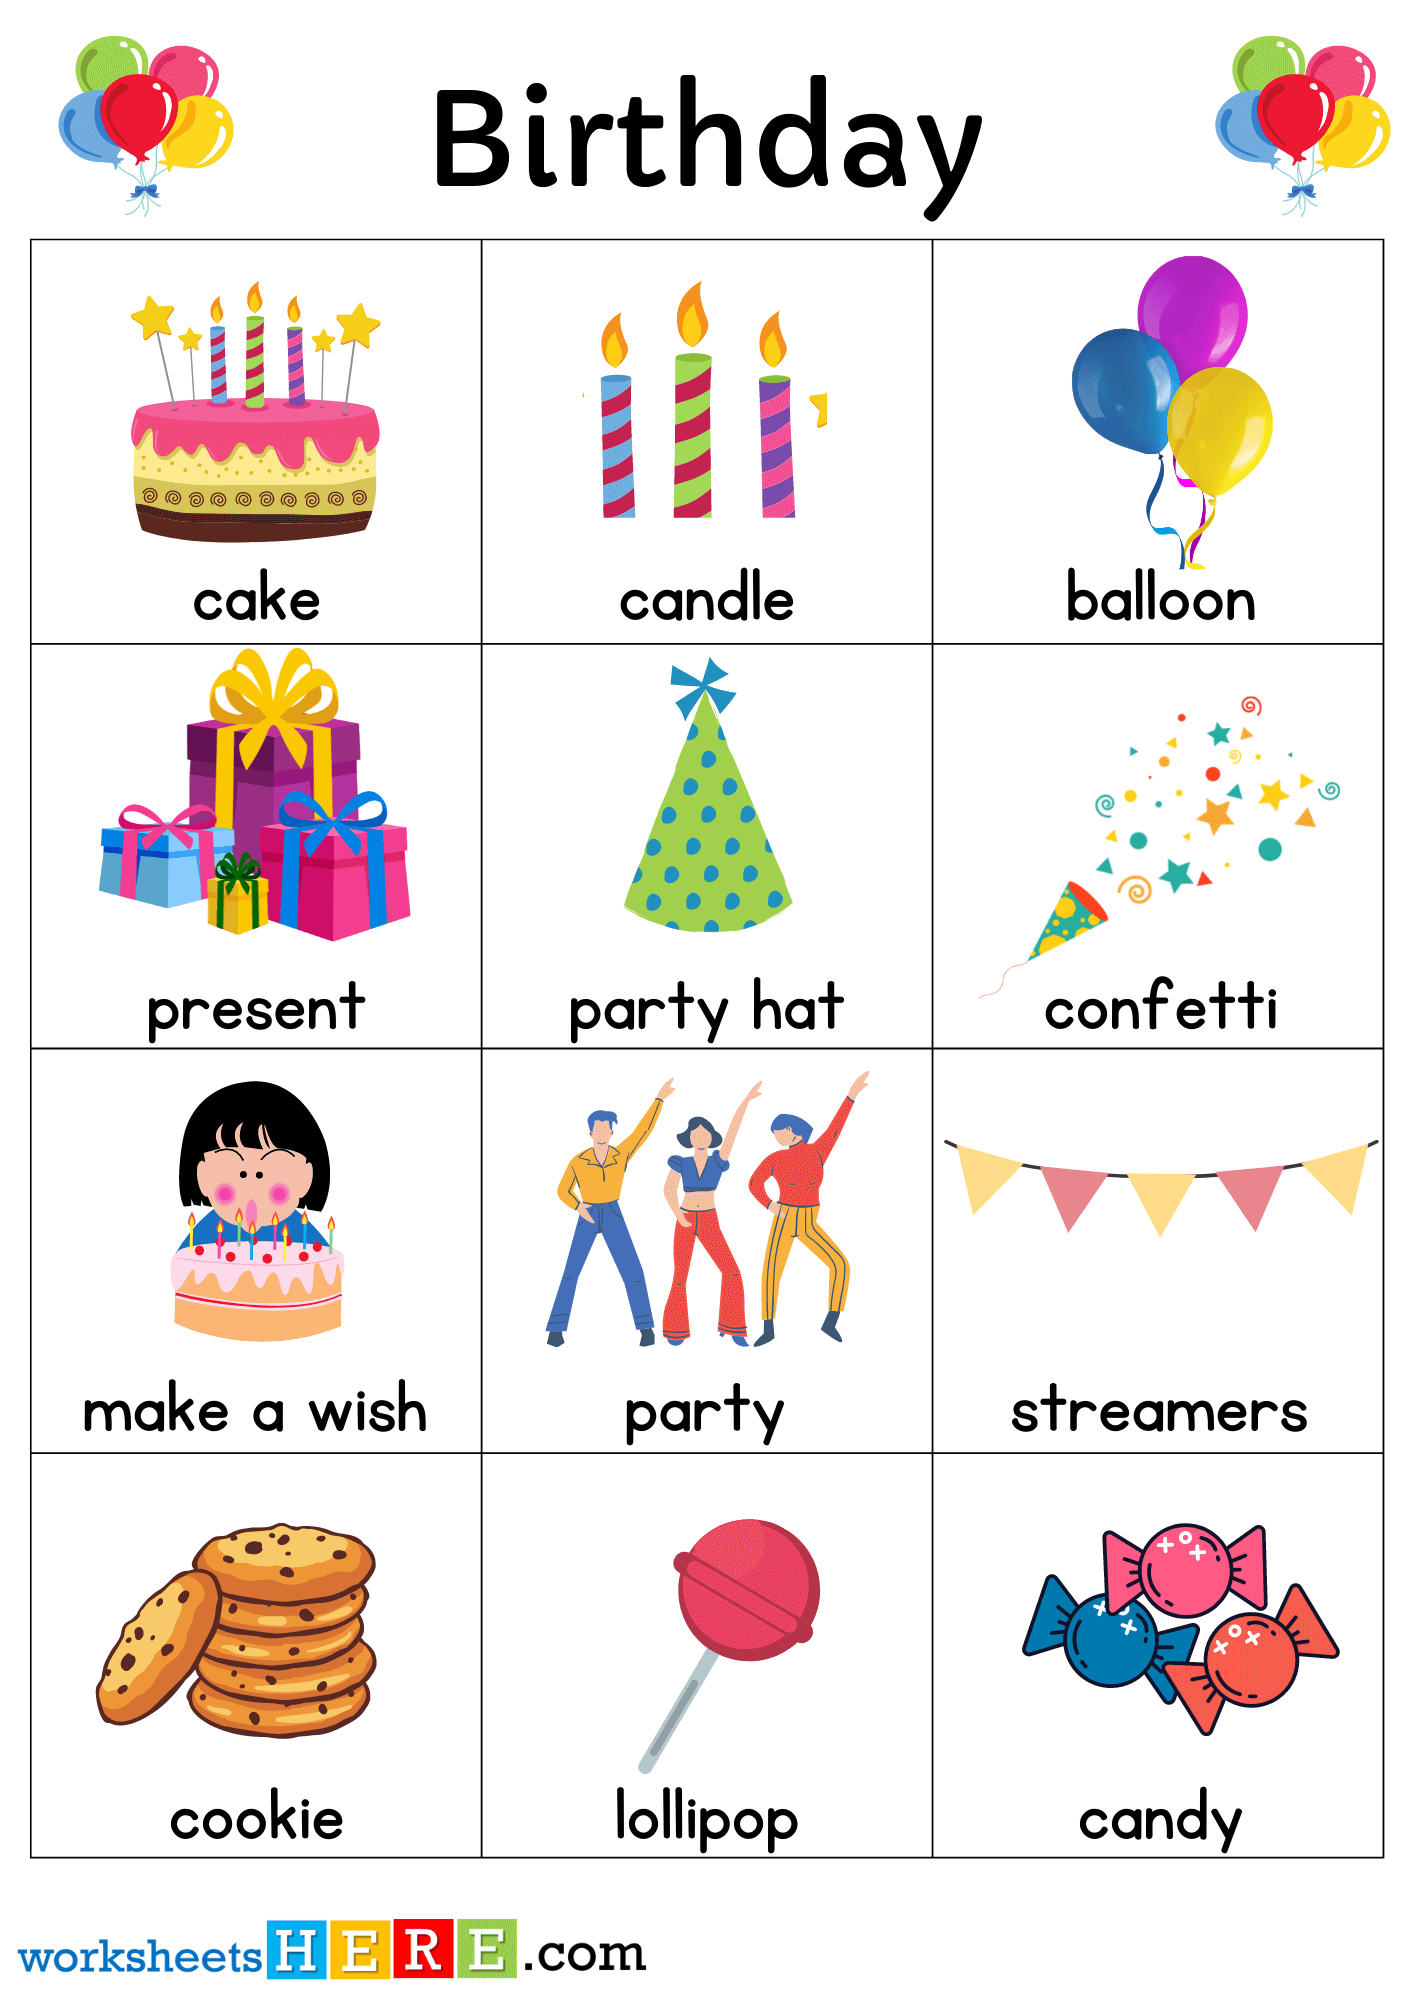 Birthday Objects Names with Pictures, Birthday Flashcards PDF Worksheets For Kindergarten